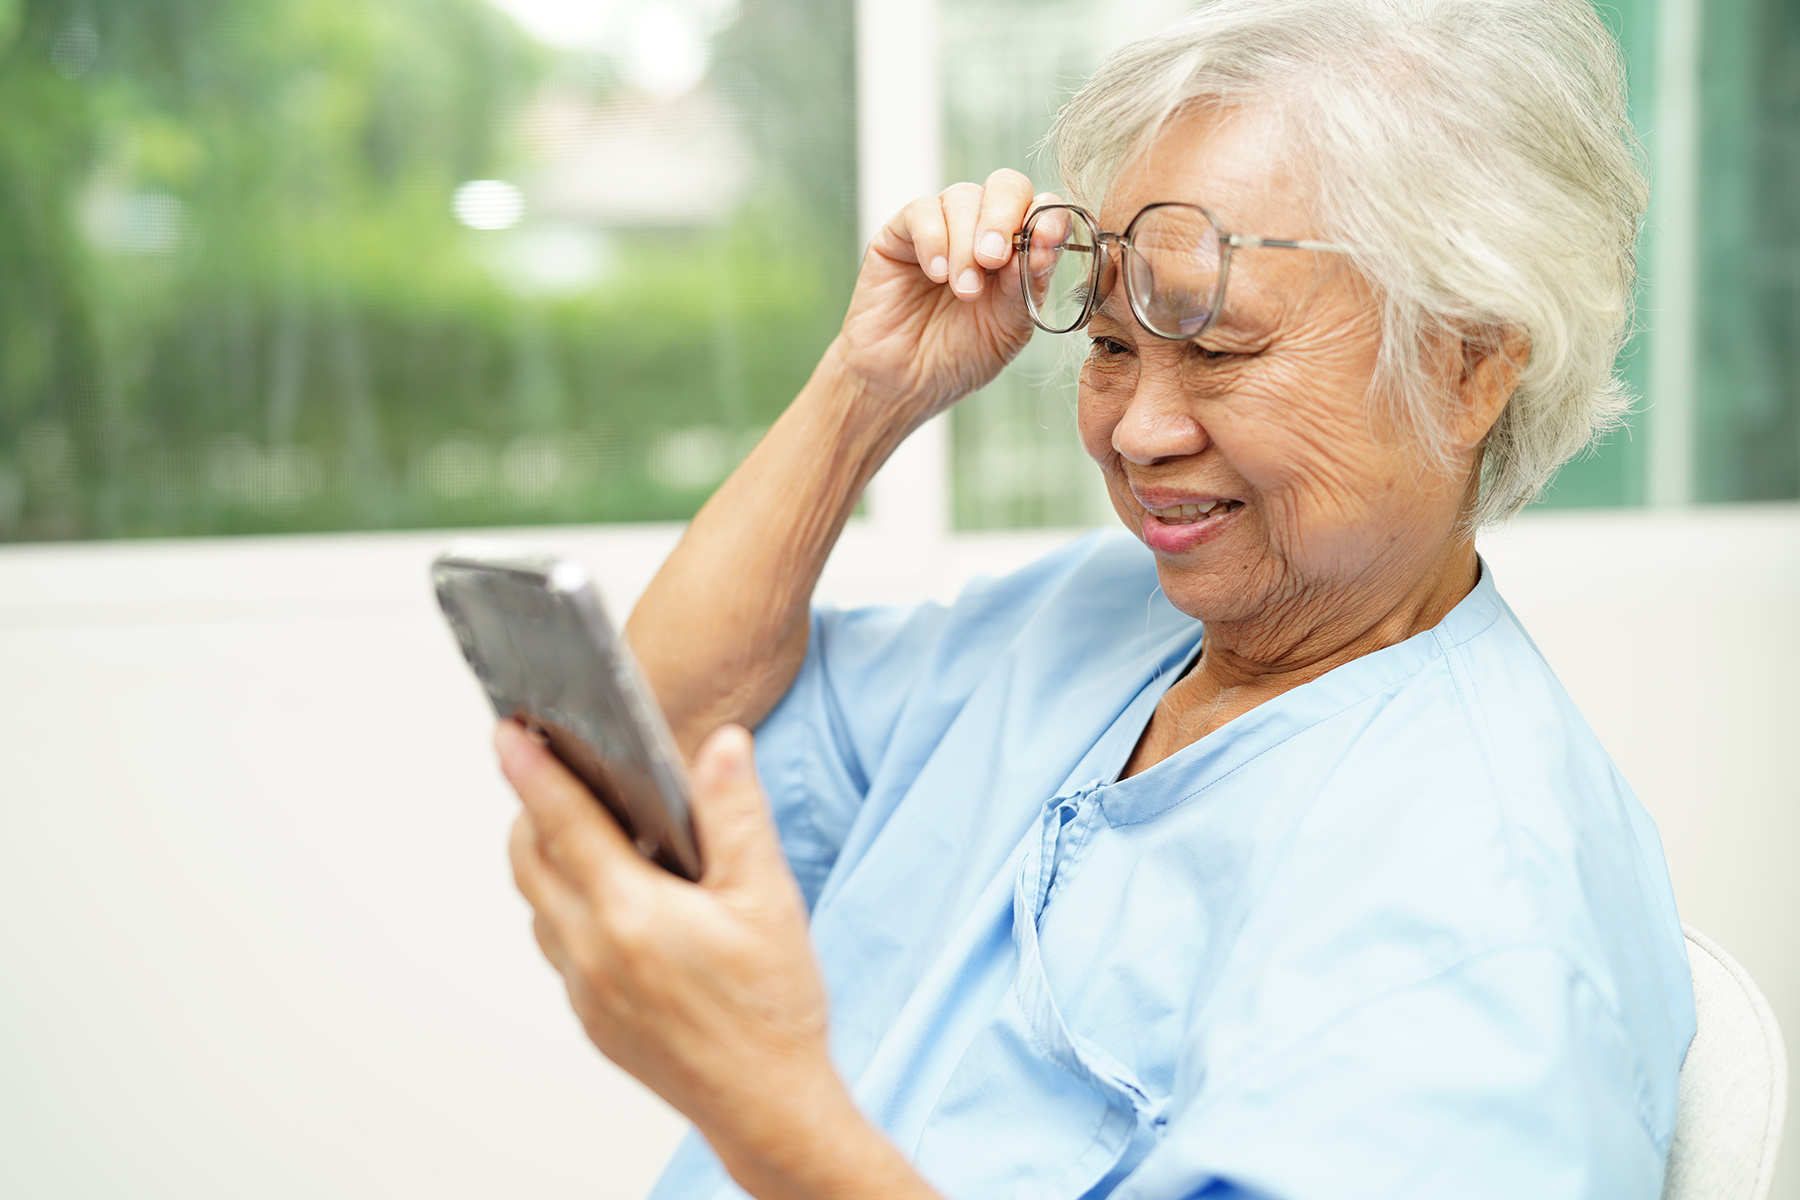 Older woman with grey hair in a hospital gown lifts her glasses to read on her phone